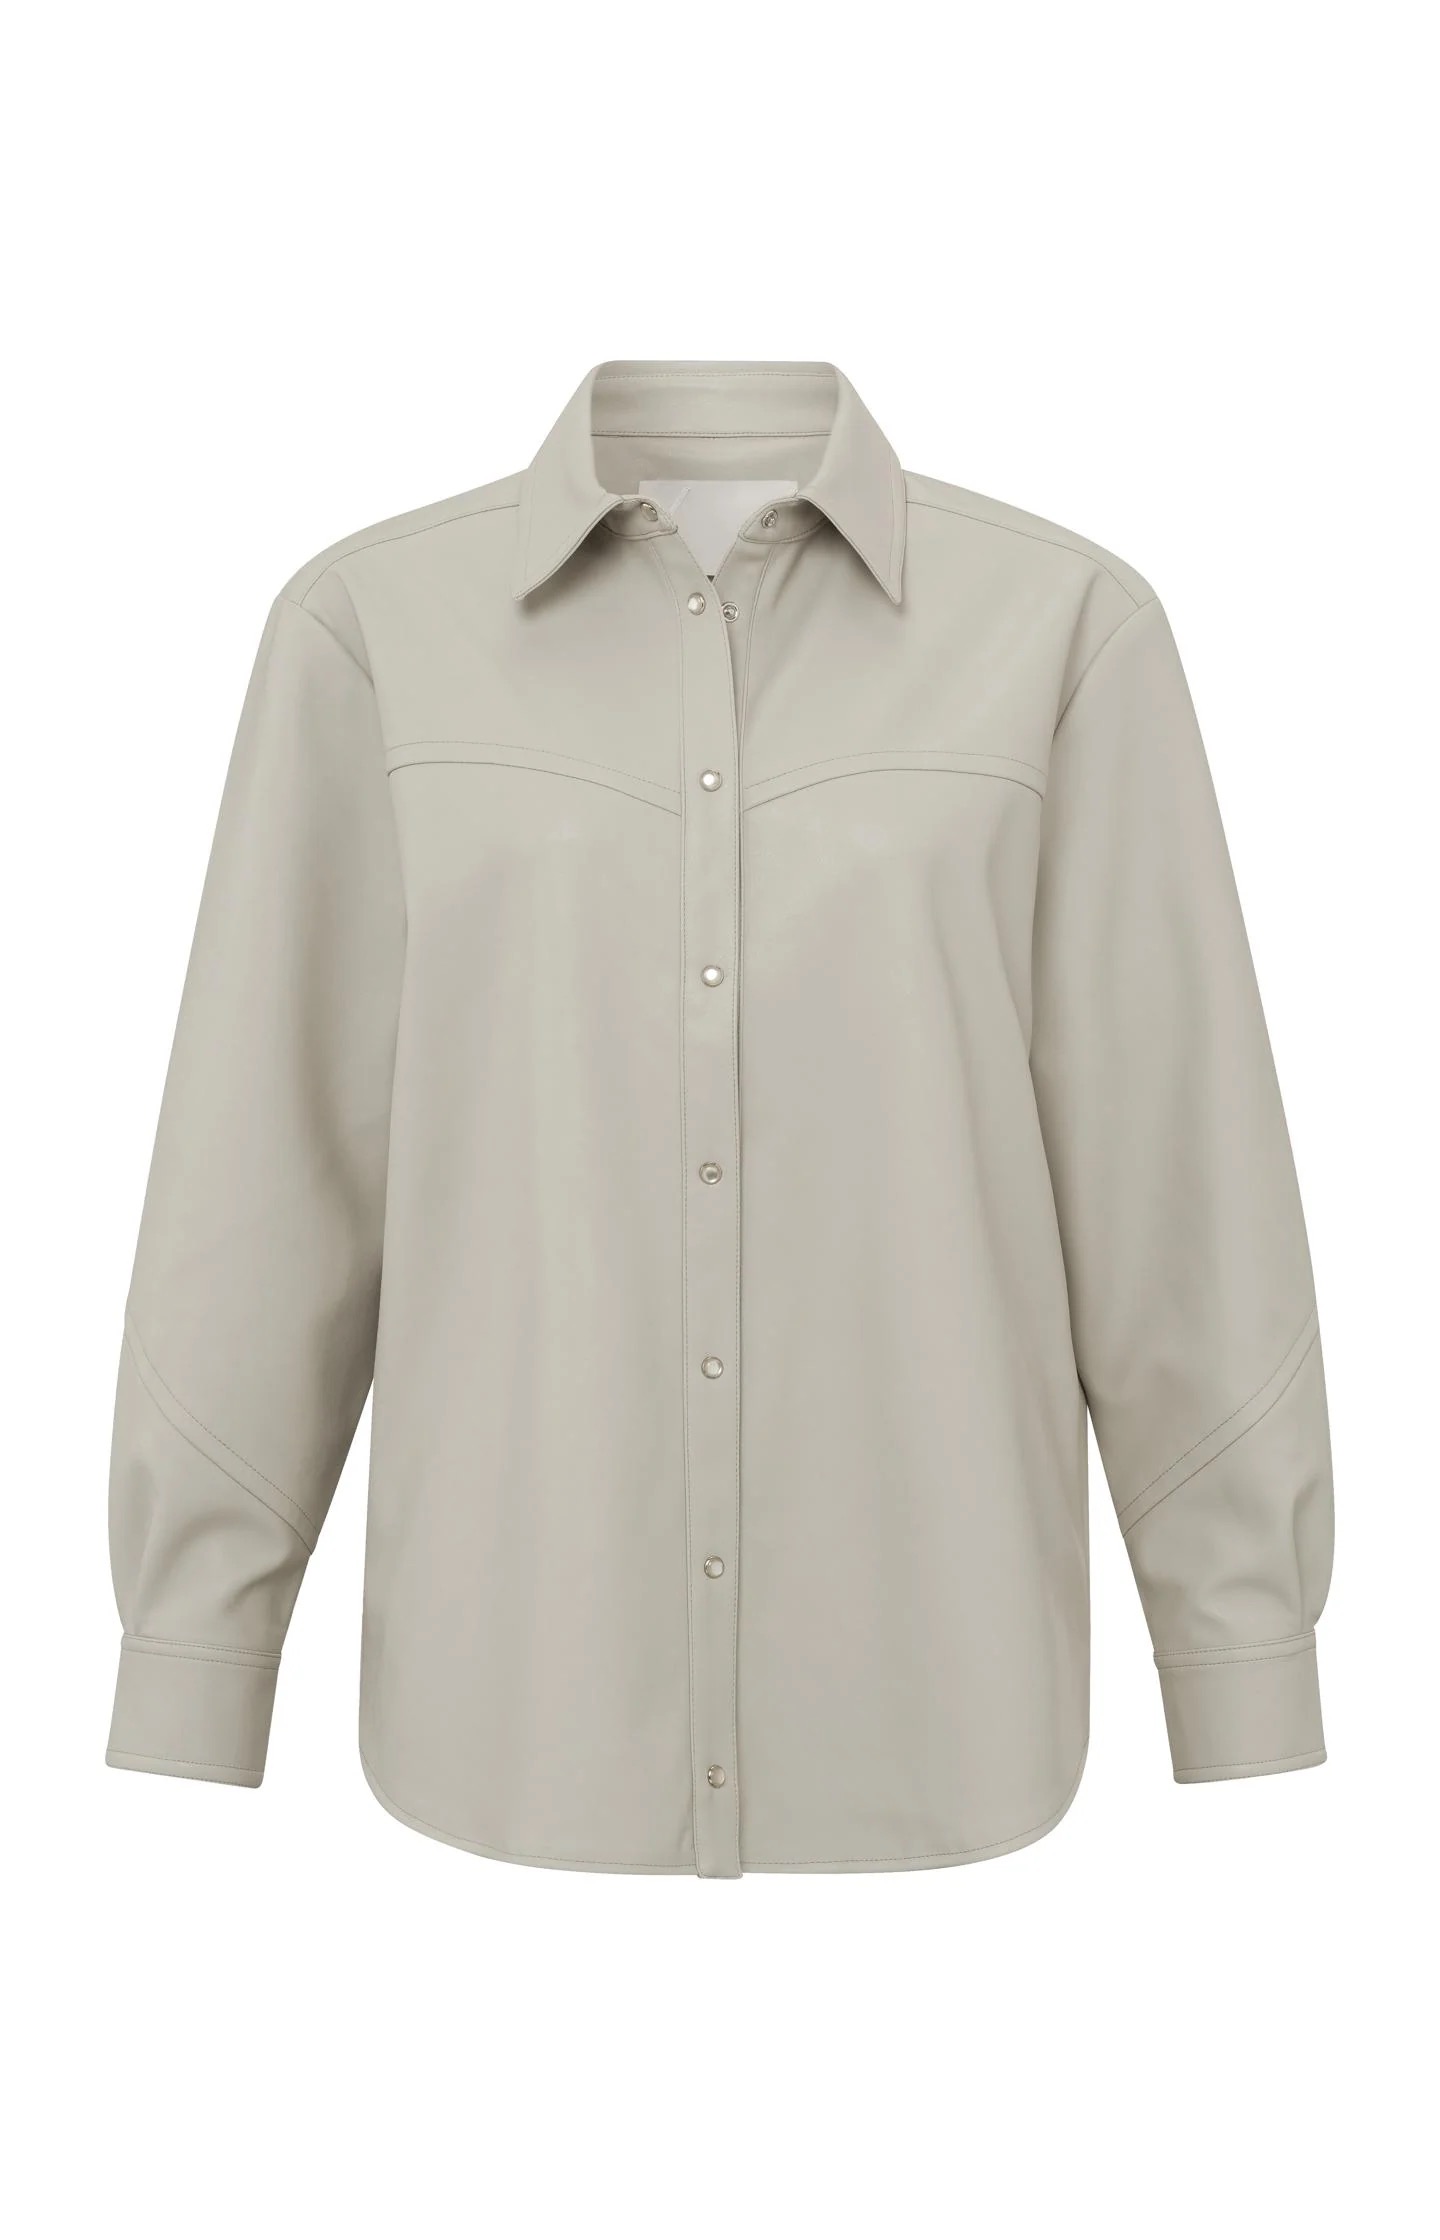 Yaya Faux Leather Blouse With Collar, Long Sleeves And Buttons - Silver Lining Beige